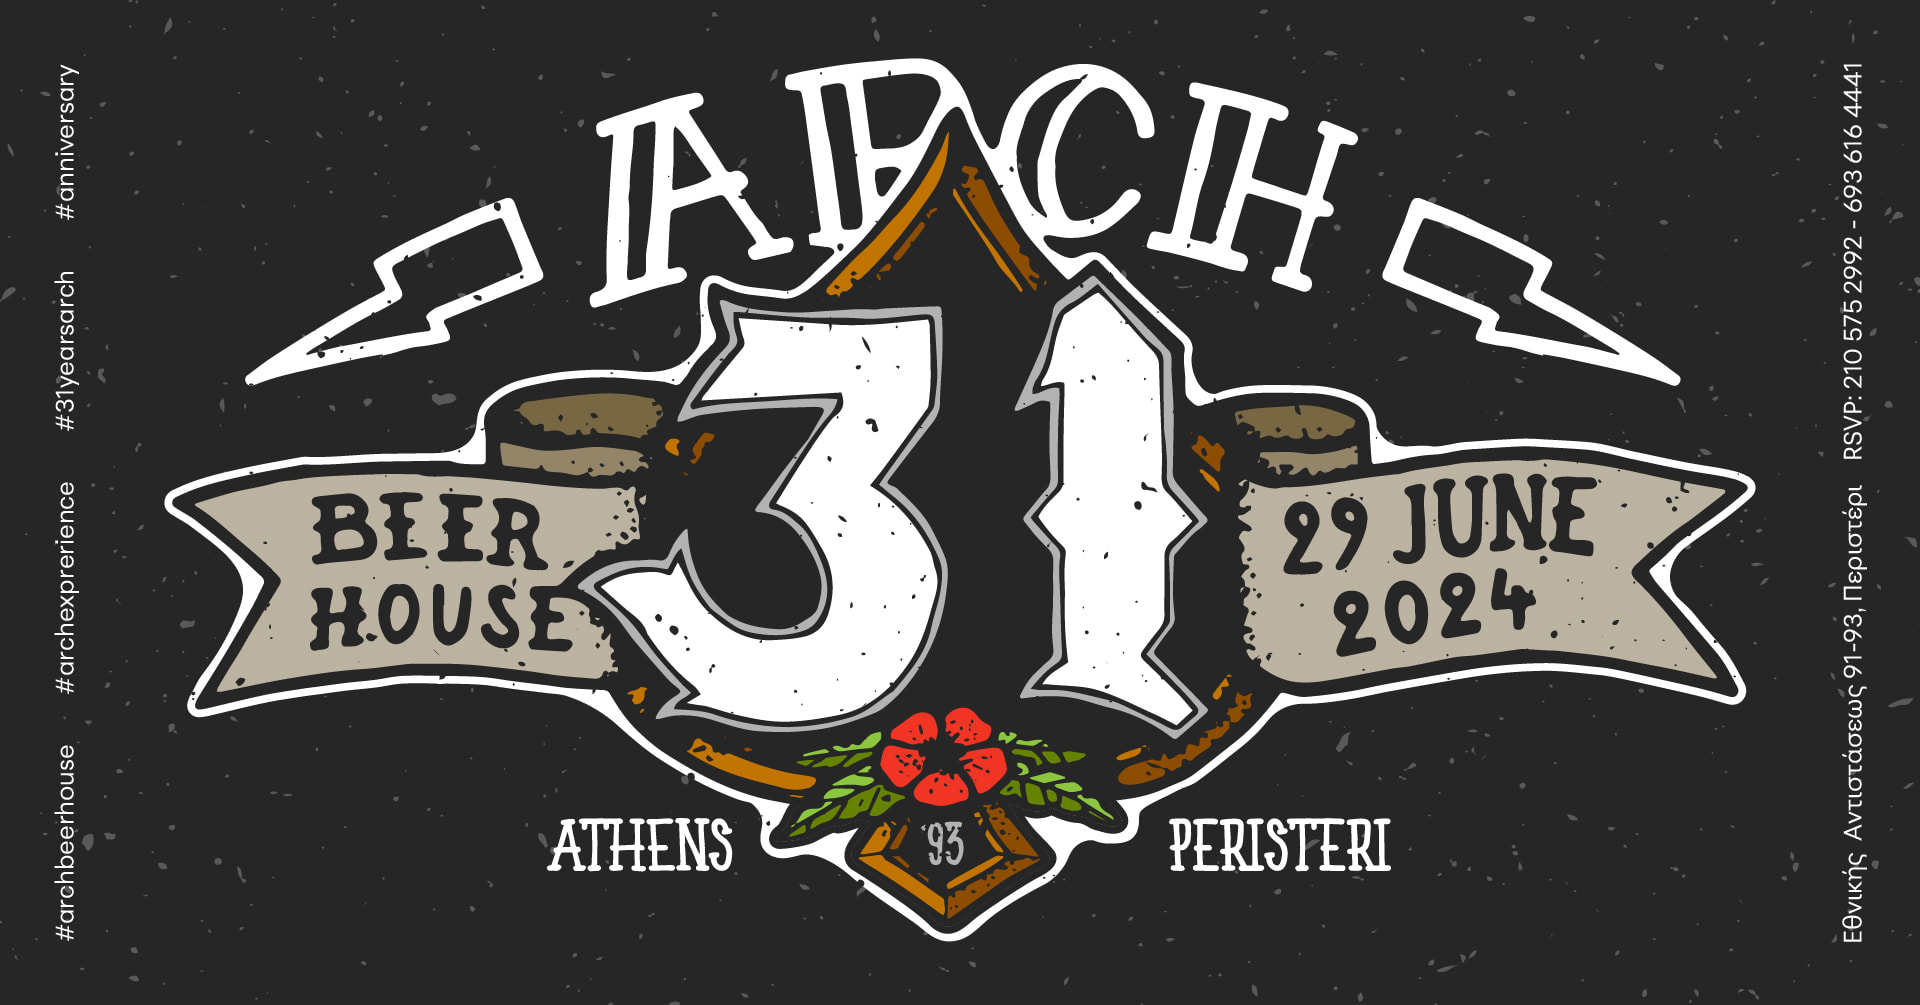 Arch Beer House - 31 years party